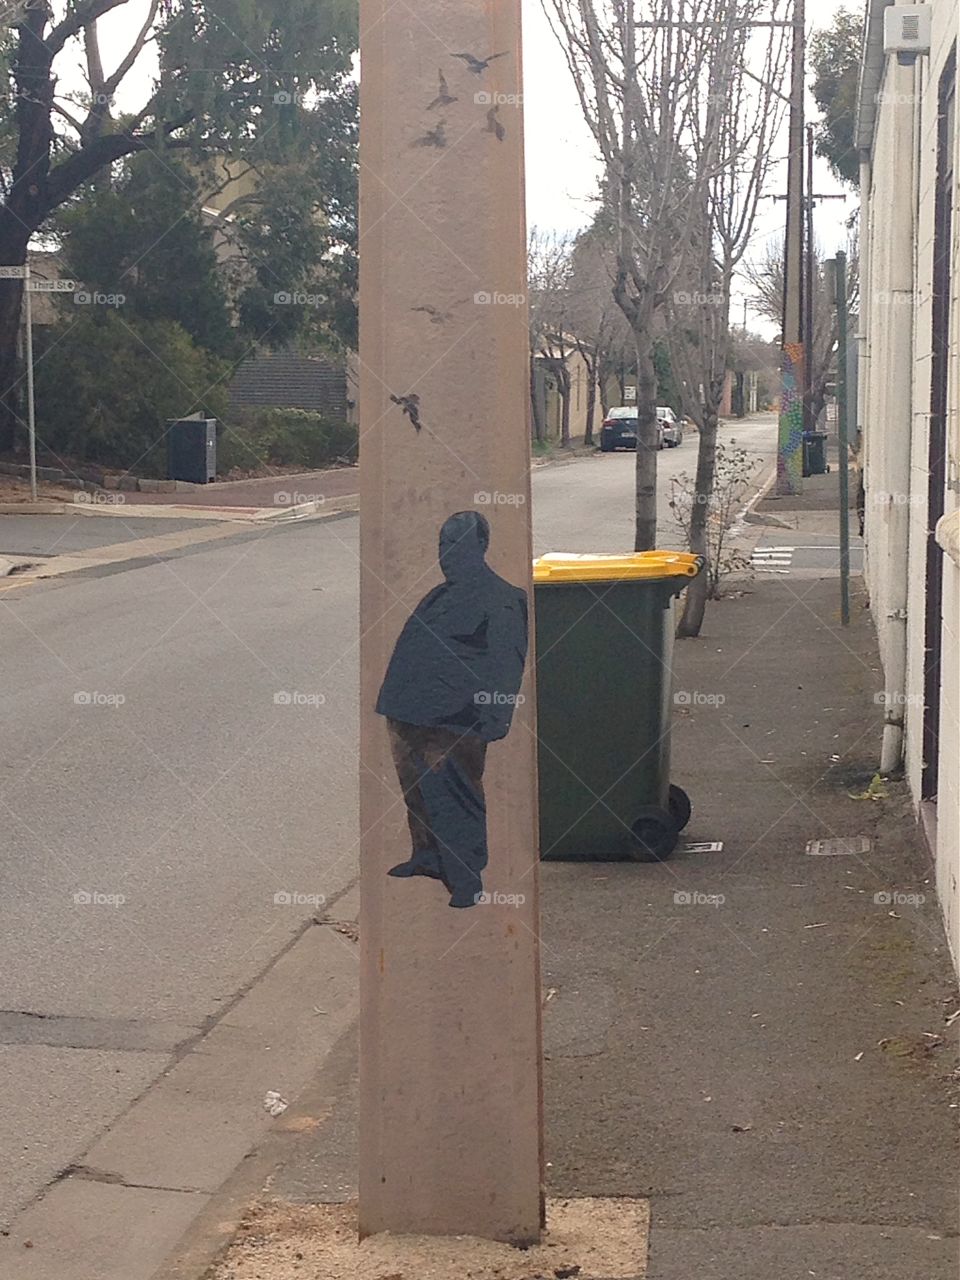 Art on old neighbourhood post. Artists are invited, in this Adelaide, S.Australia neighbourhood to create art on its lamp/electrical posts to beautify